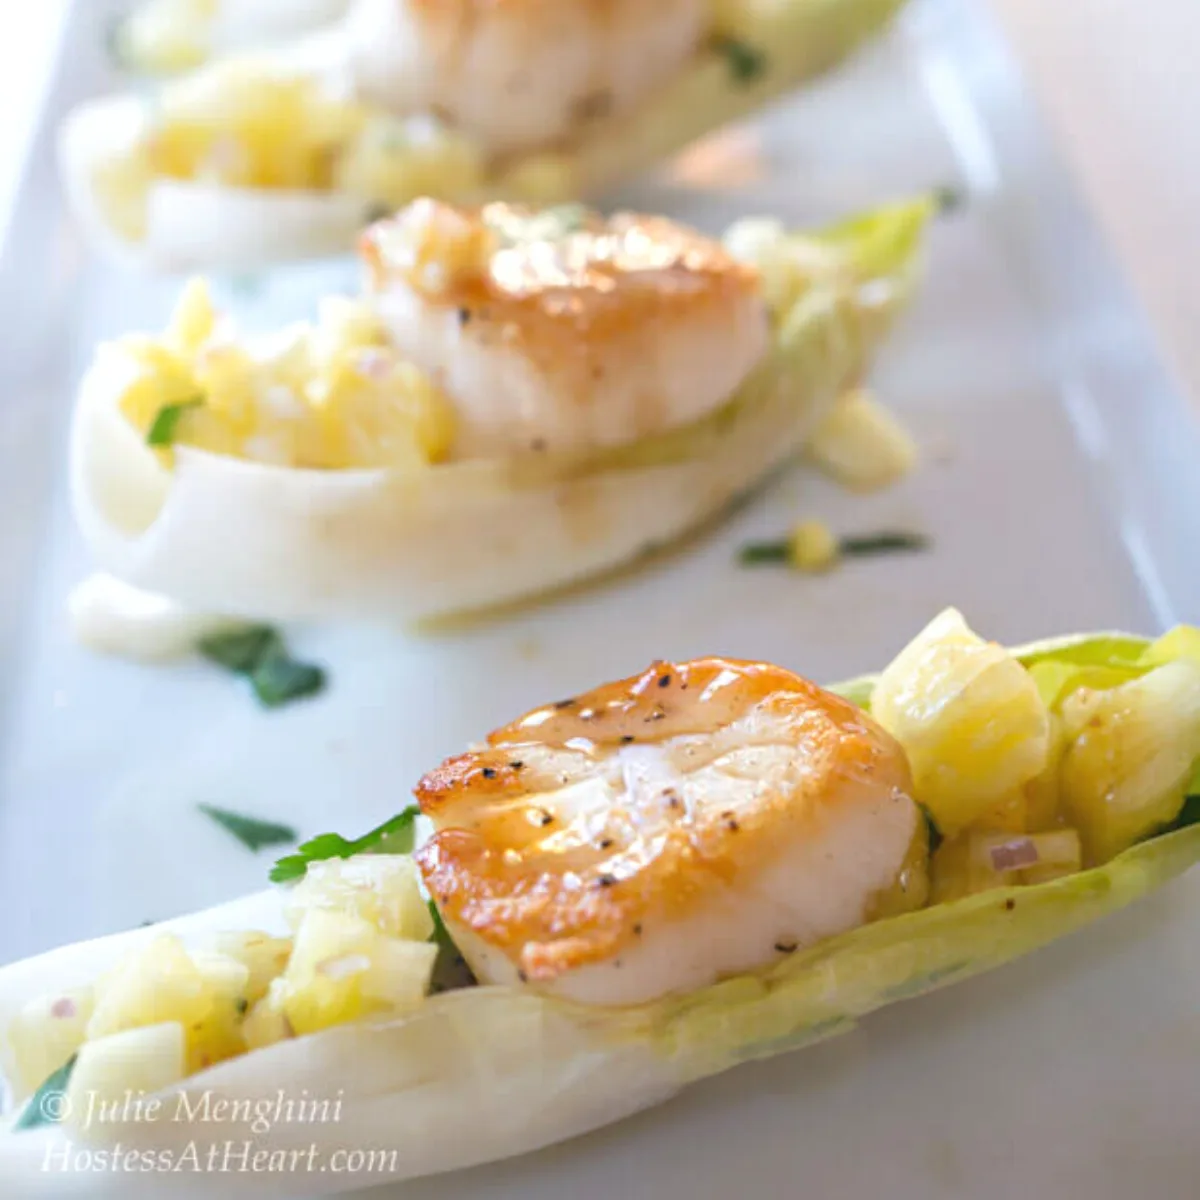 Sidebiew of a row of cooked scallops sitting on diced pineapple inside endive lettuce leaves on a white plate - Hostess At Heart